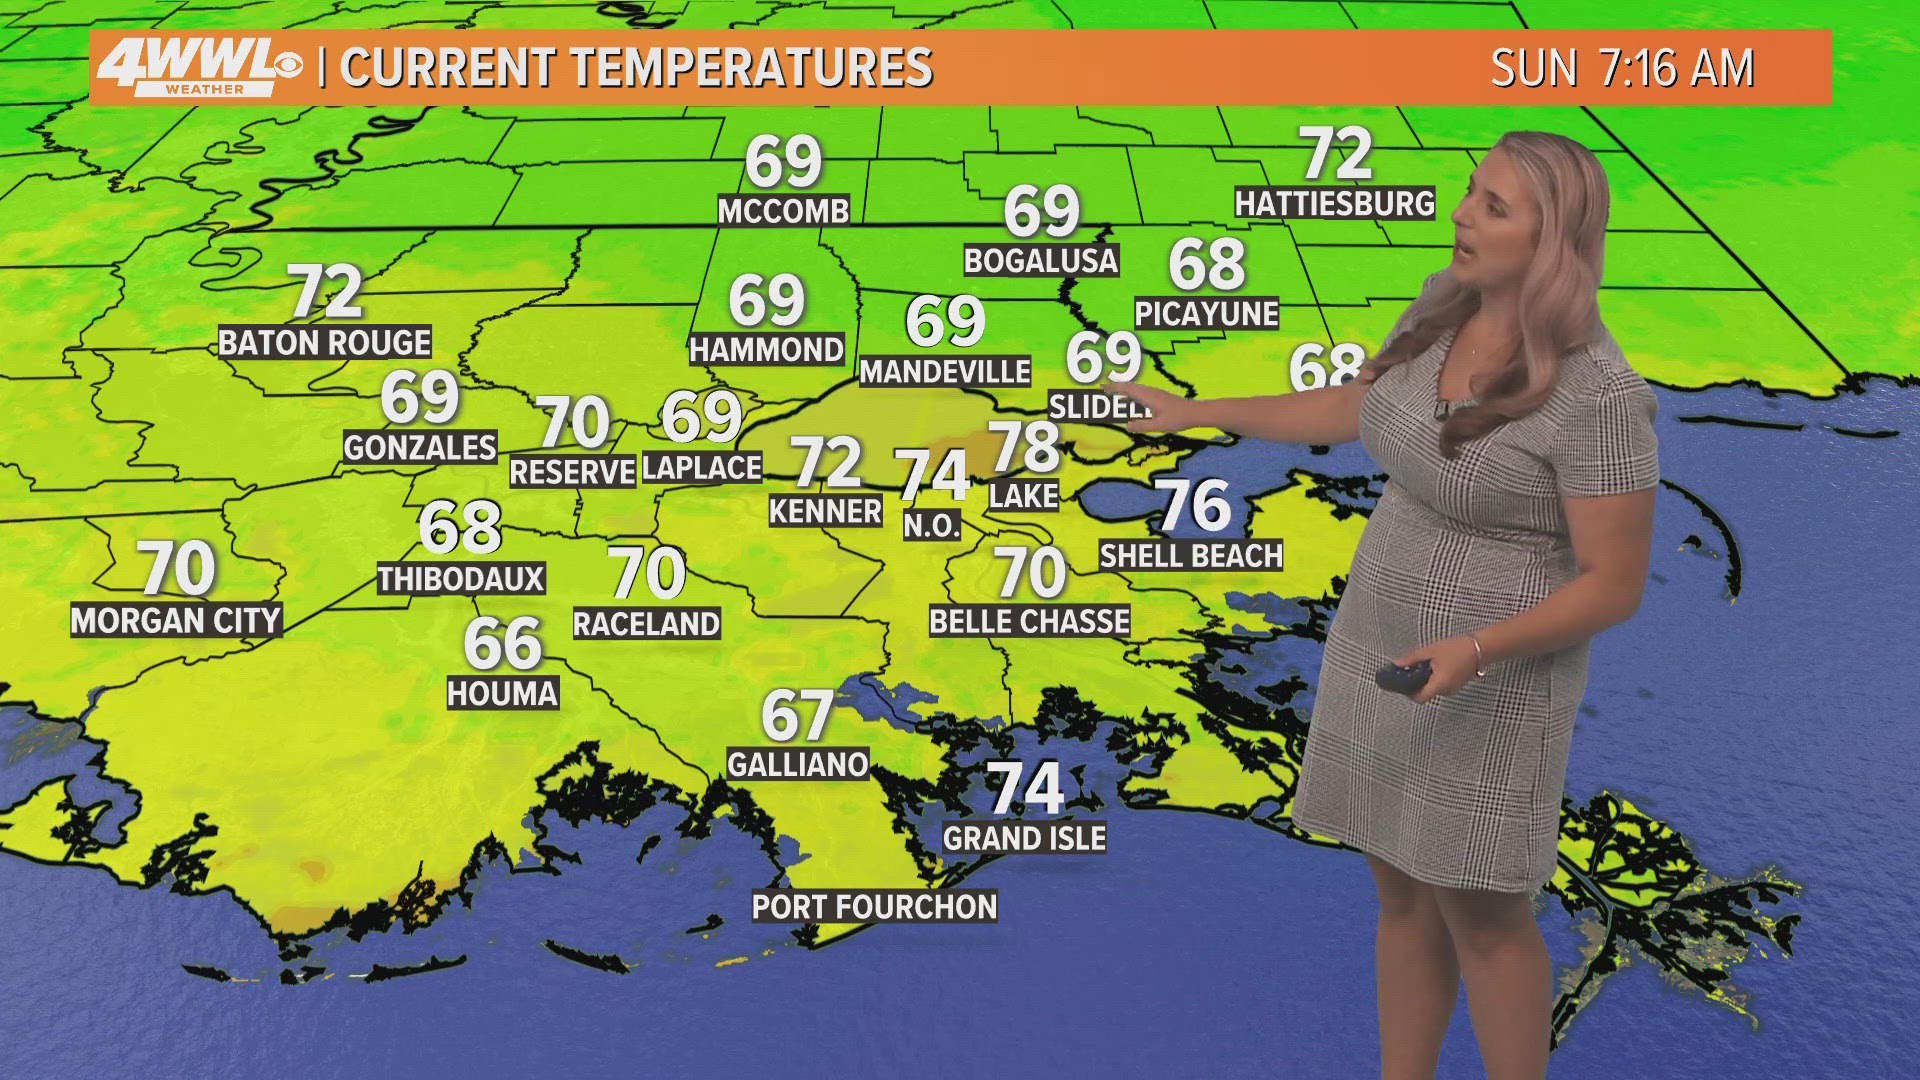 Meteorologist Alexa Trischler says it is feeling more summer-like this week with no rain.